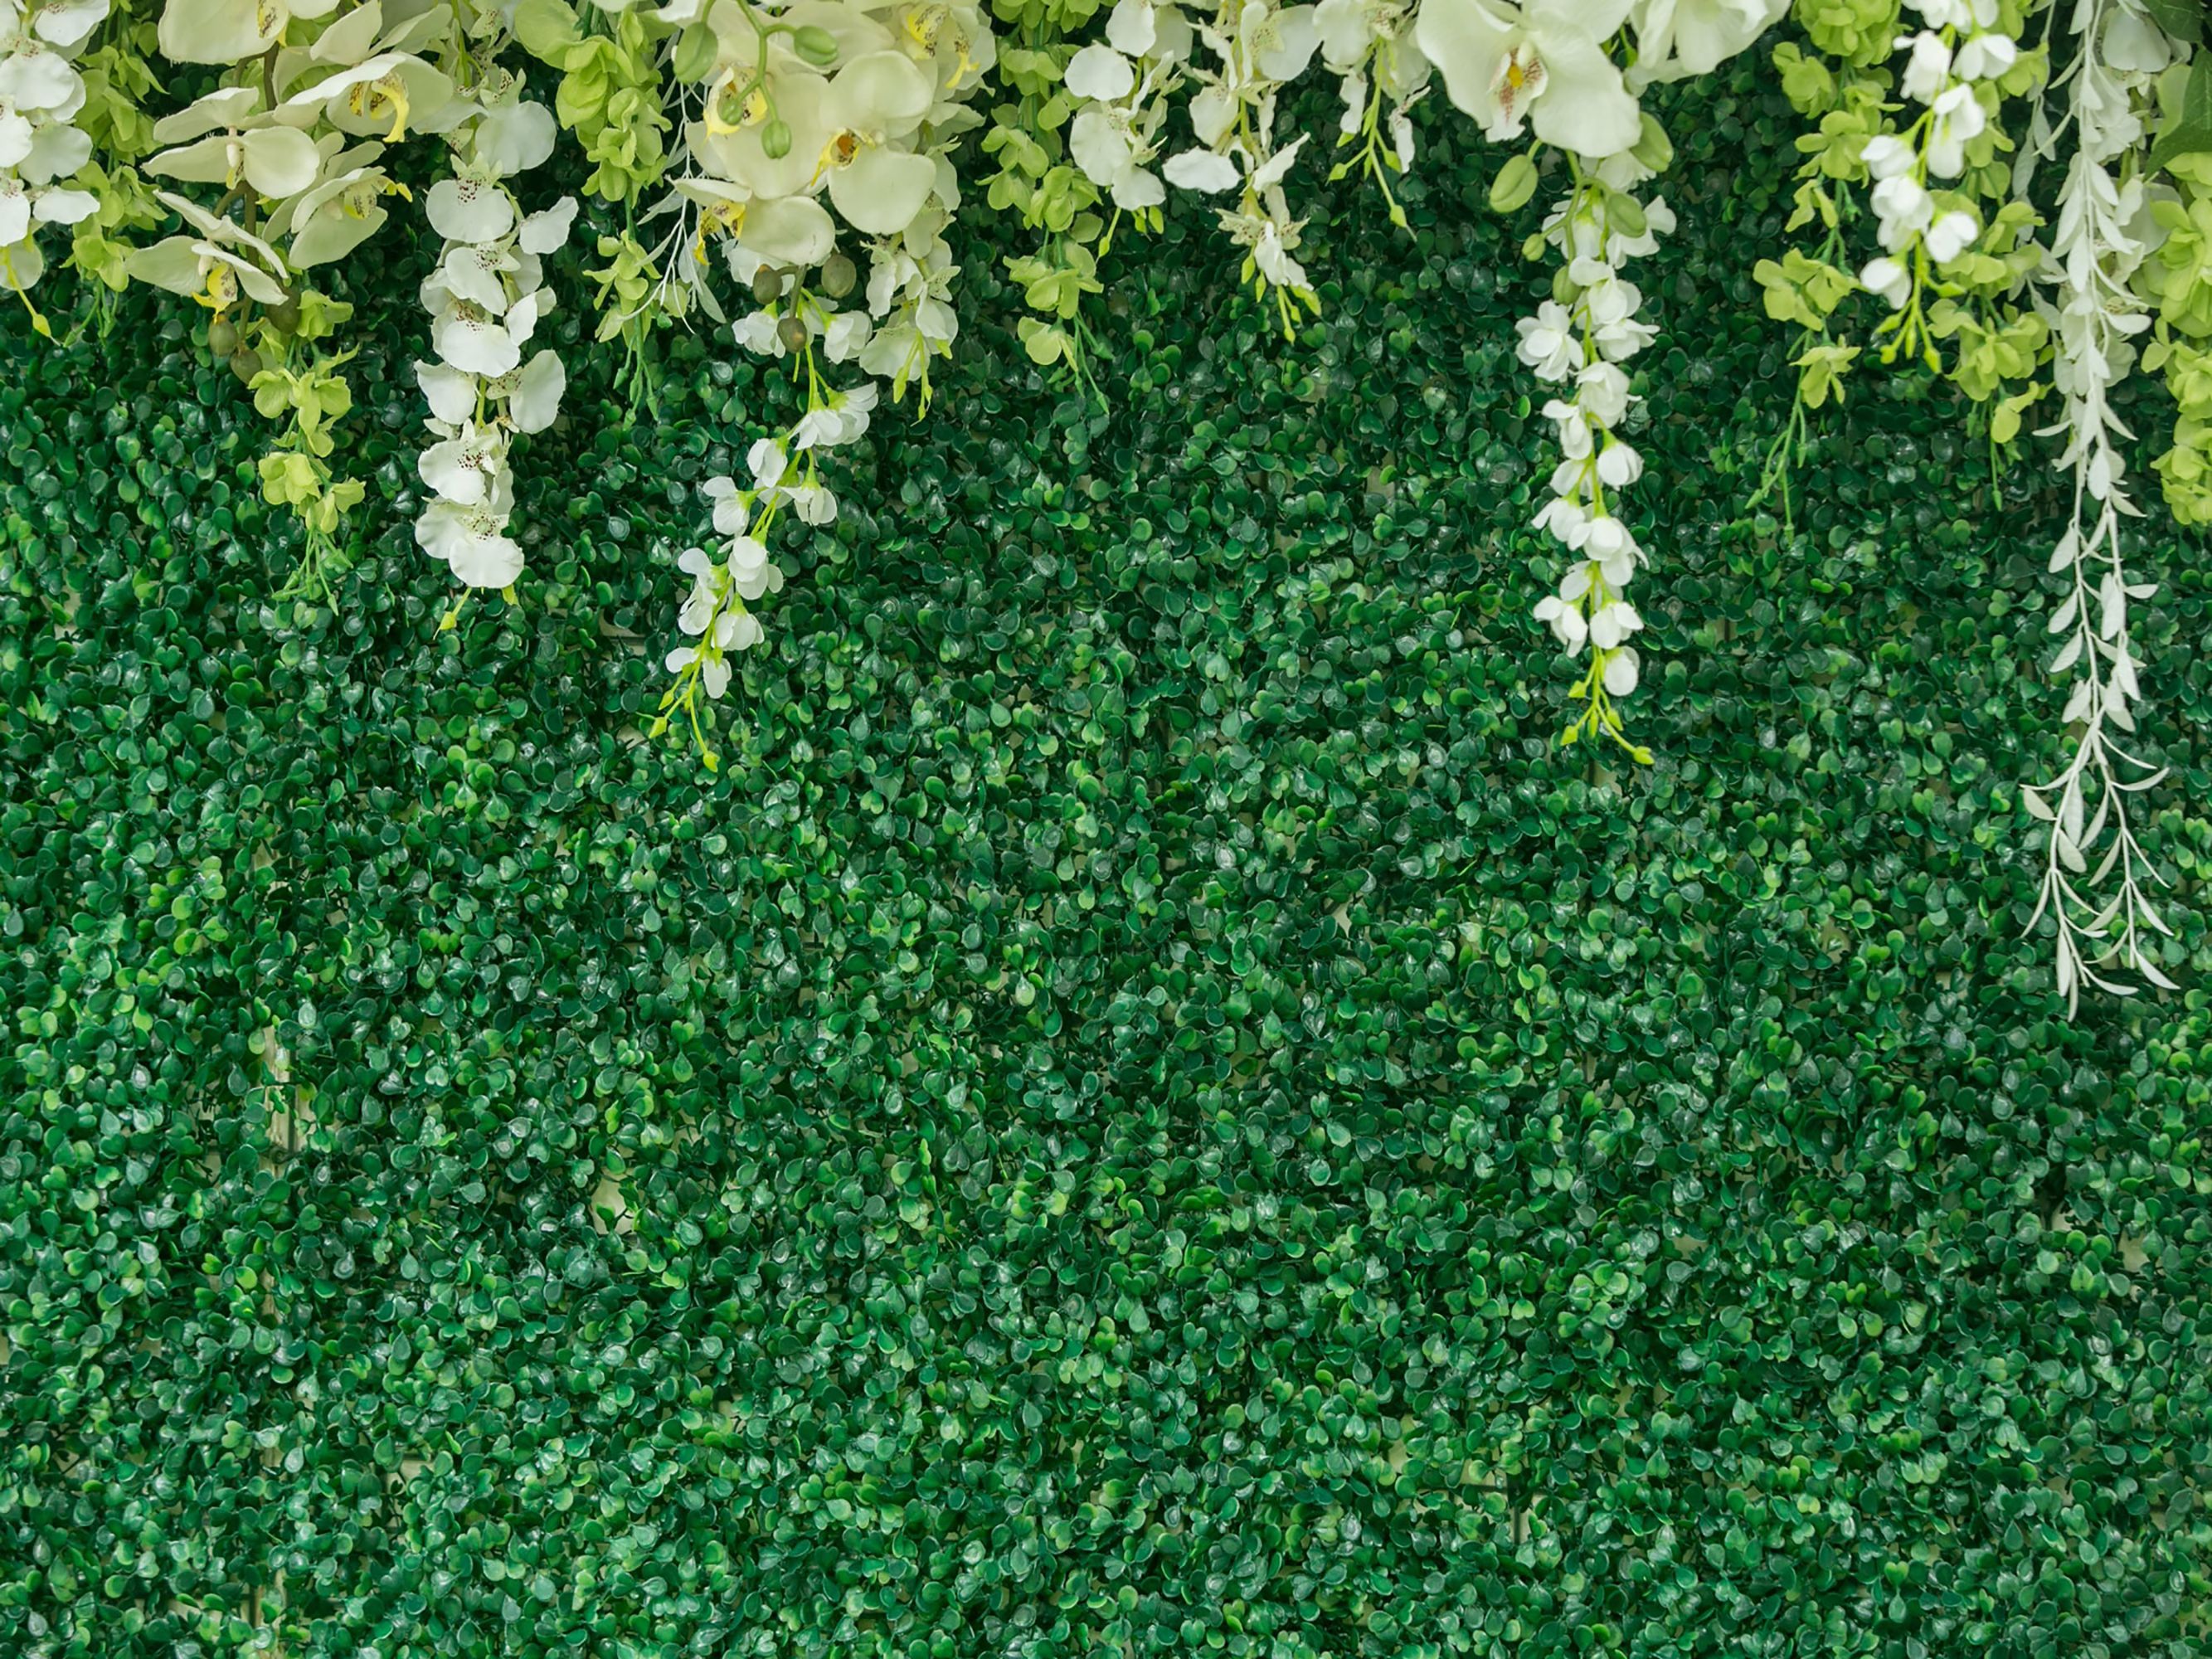 2020 Green Grass Wall Flowers Decoration Vinyl Photography Backdrops